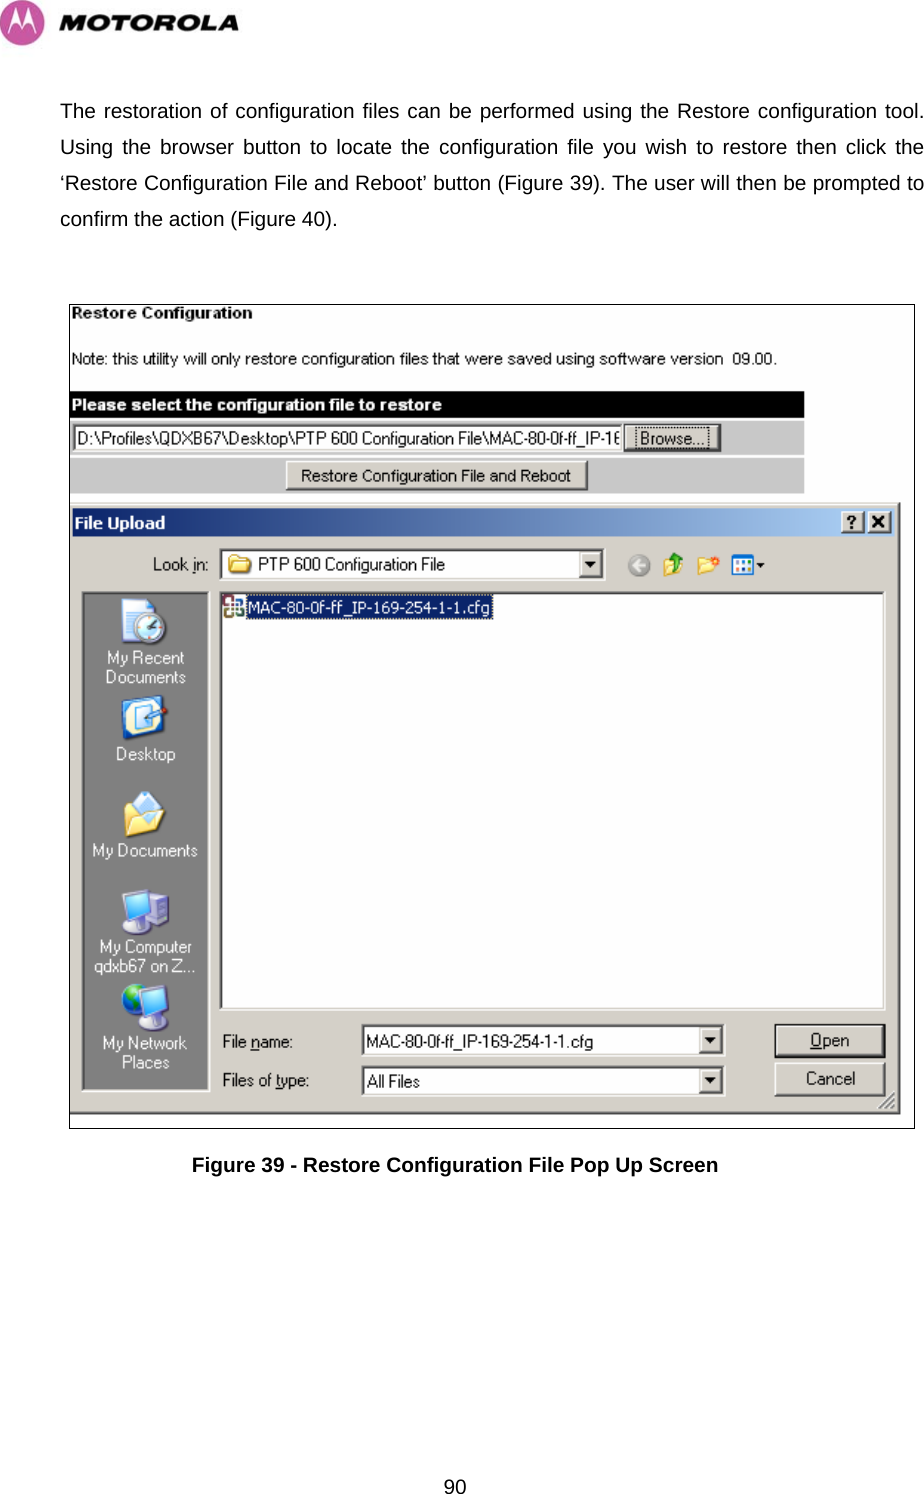   90The restoration of configuration files can be performed using the Restore configuration tool. Using the browser button to locate the configuration file you wish to restore then click the ‘Restore Configuration File and Reboot’ button (Figure 39). The user will then be prompted to confirm the action (Figure 40).   Figure 39 - Restore Configuration File Pop Up Screen 